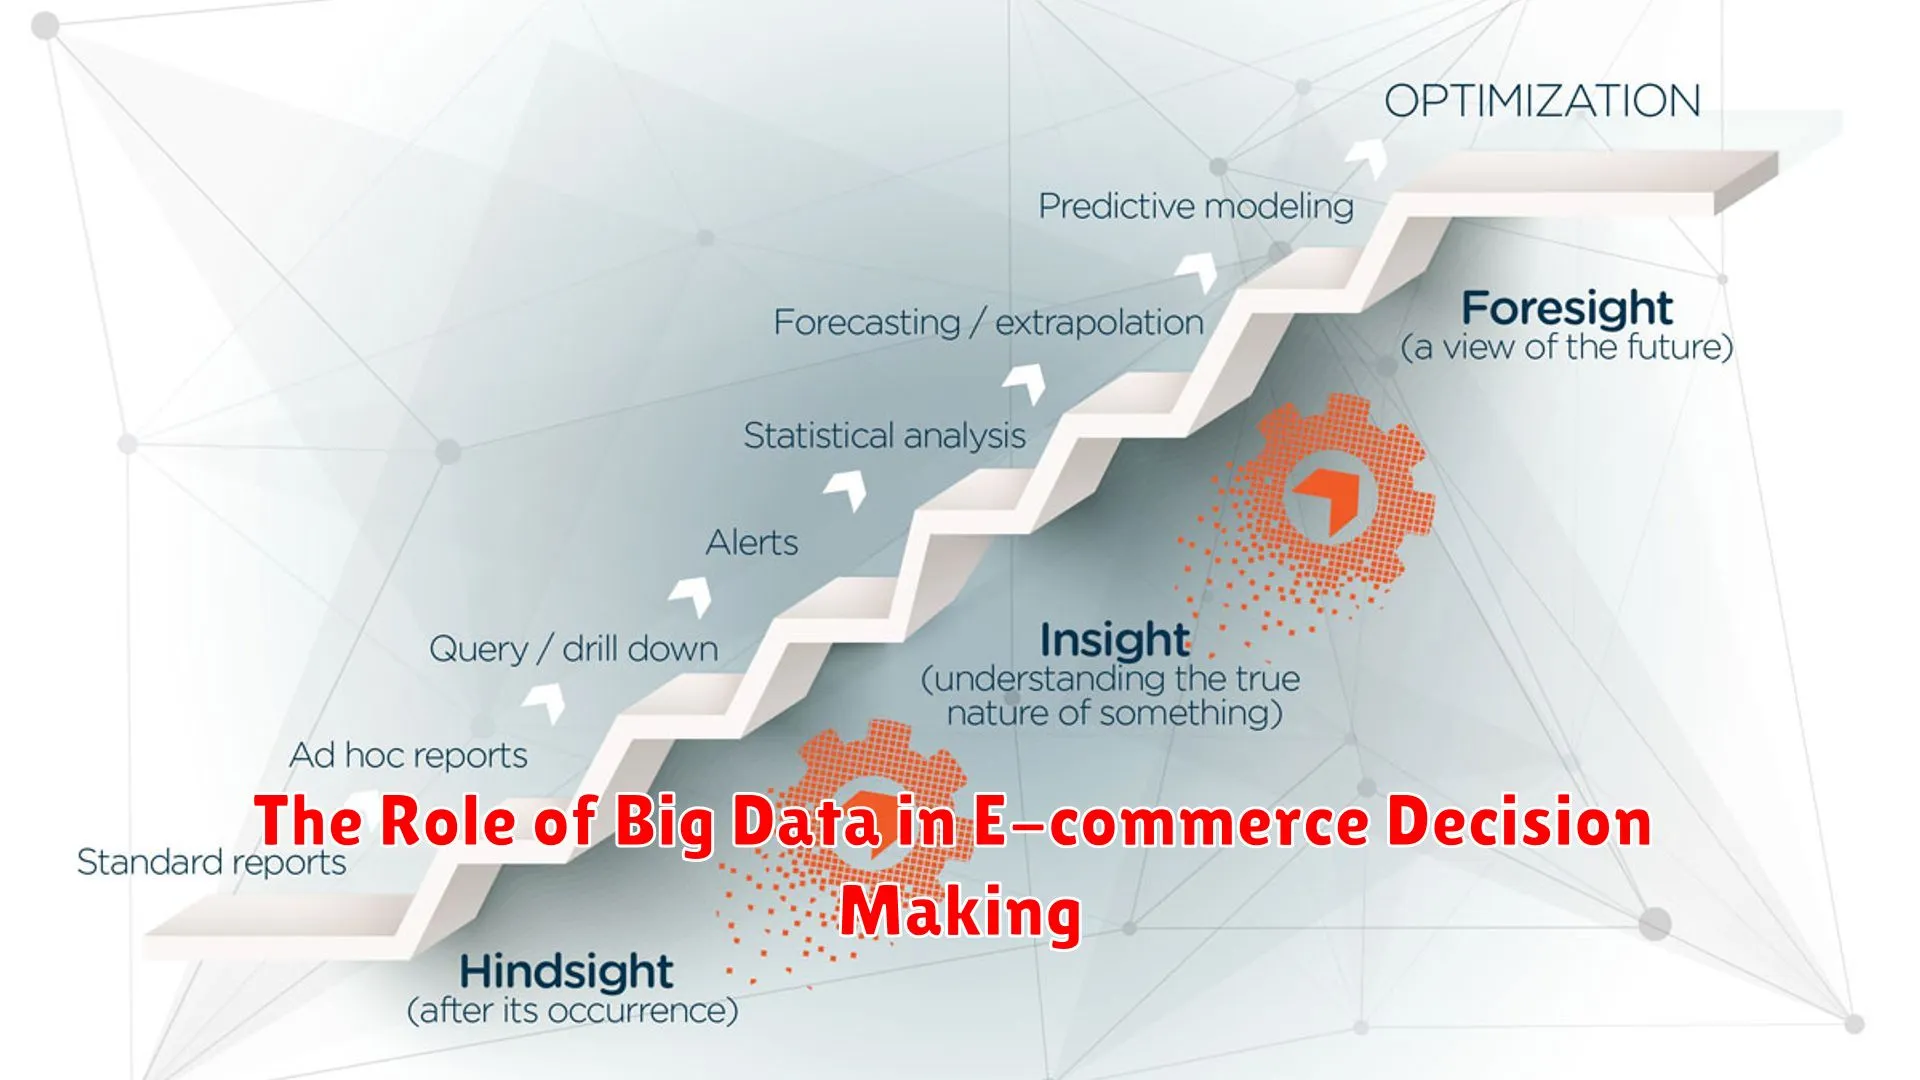 The Role of Big Data in E-commerce Decision Making